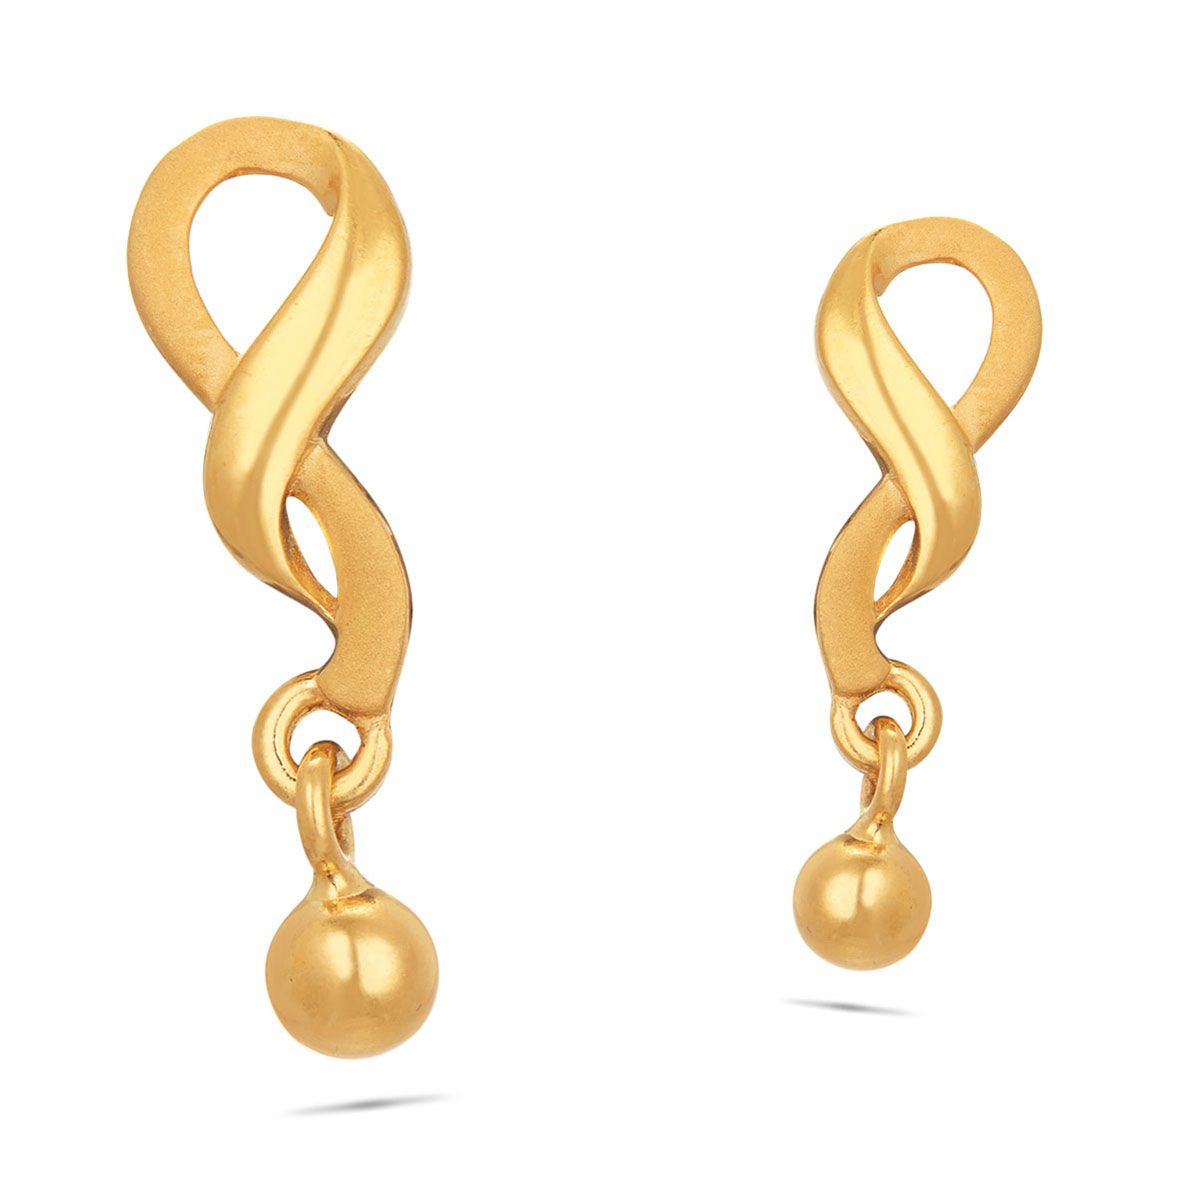 Daily Wear Earring Designs in Gold - Get Easy Art and Craft Ideas